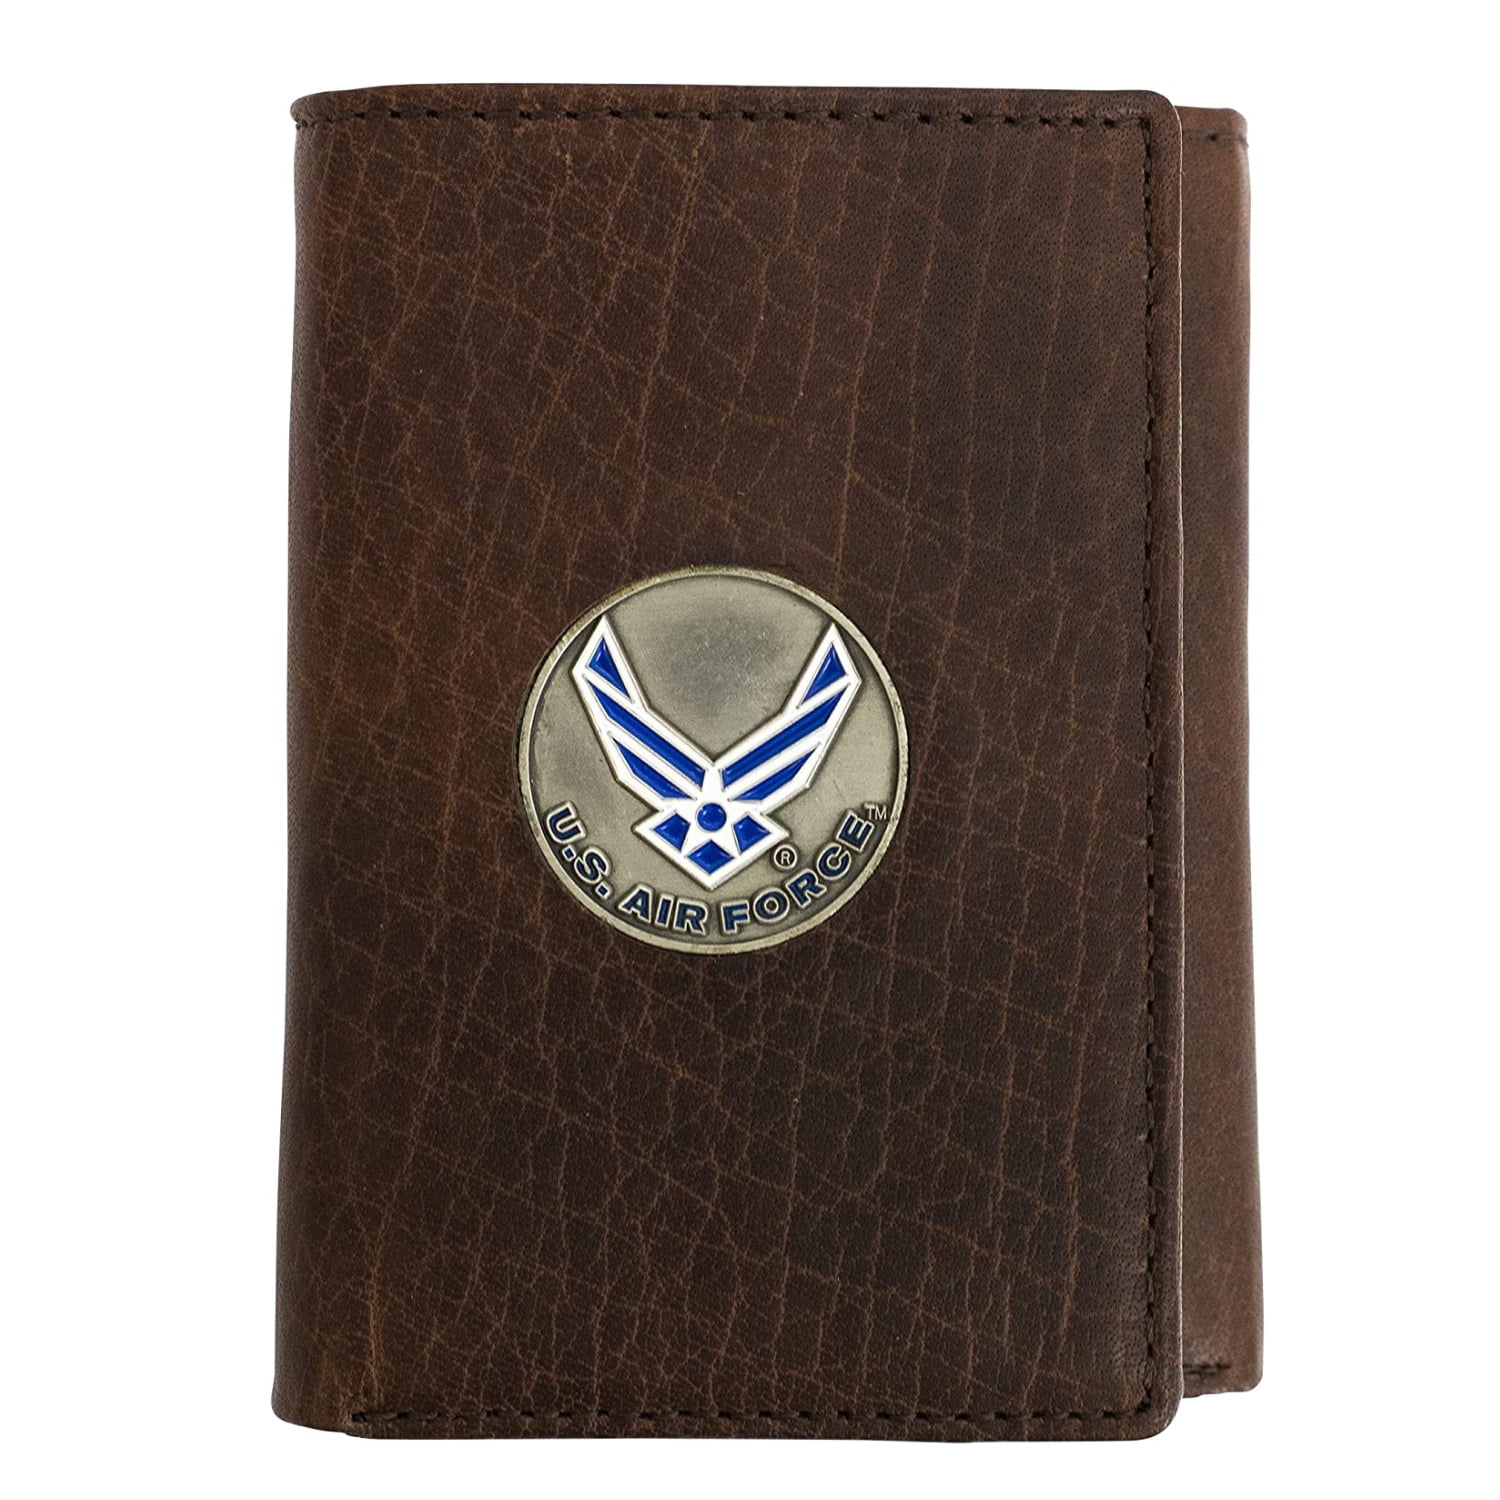 Vintage US Army Air Corps ID Card Holder Genuine Leather Folder Case 